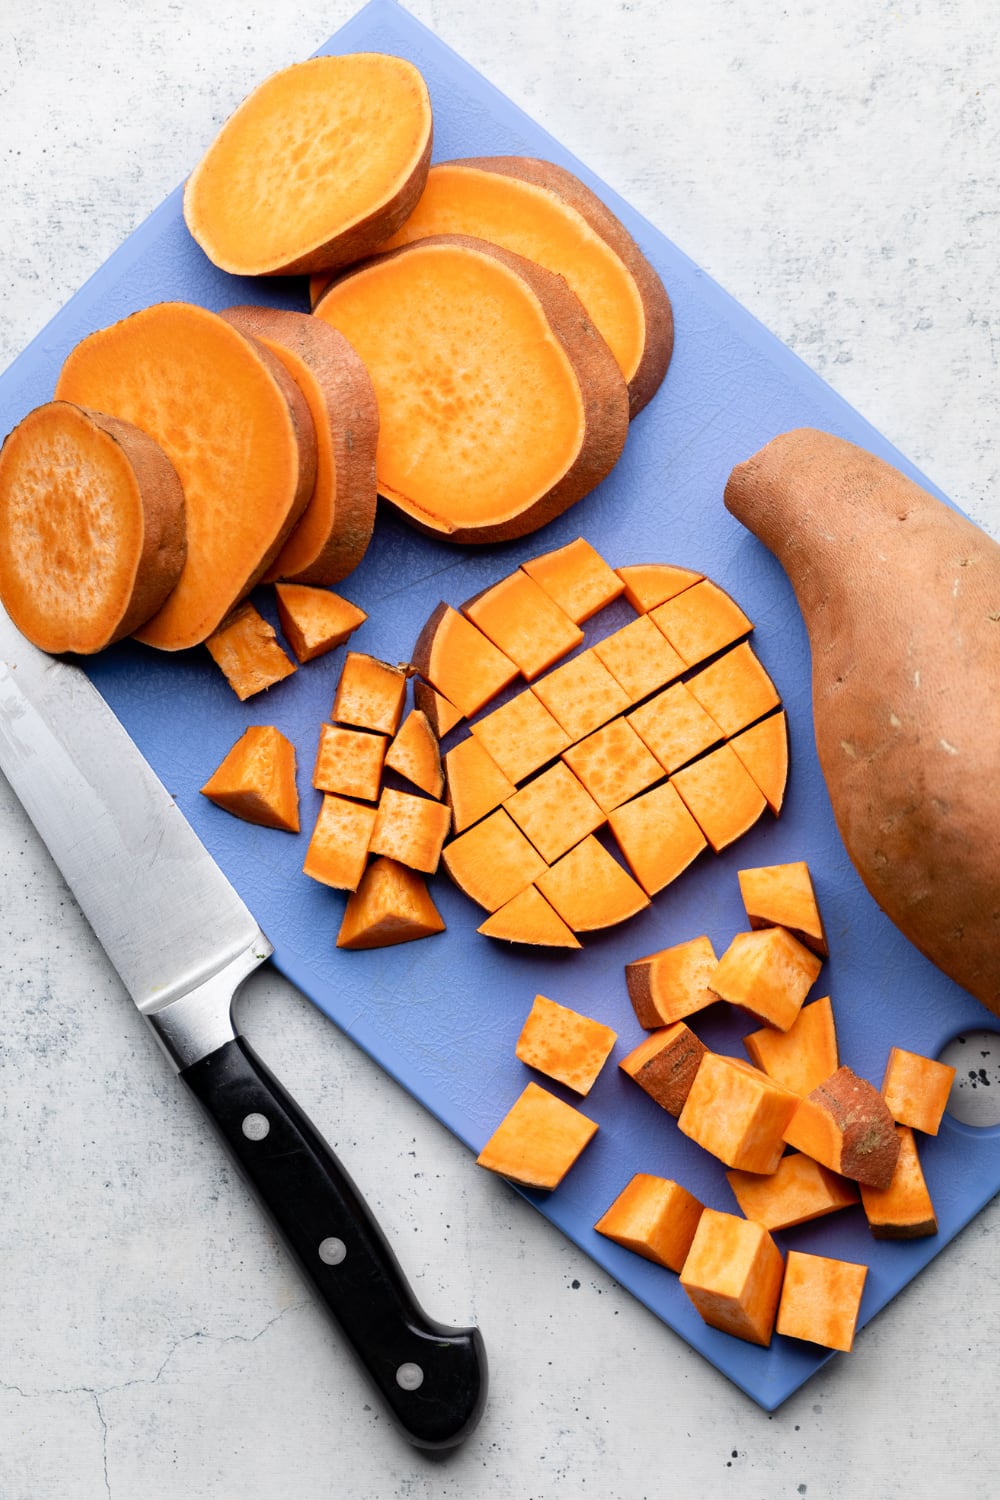 How to cut sweet potatoes into even cubes.